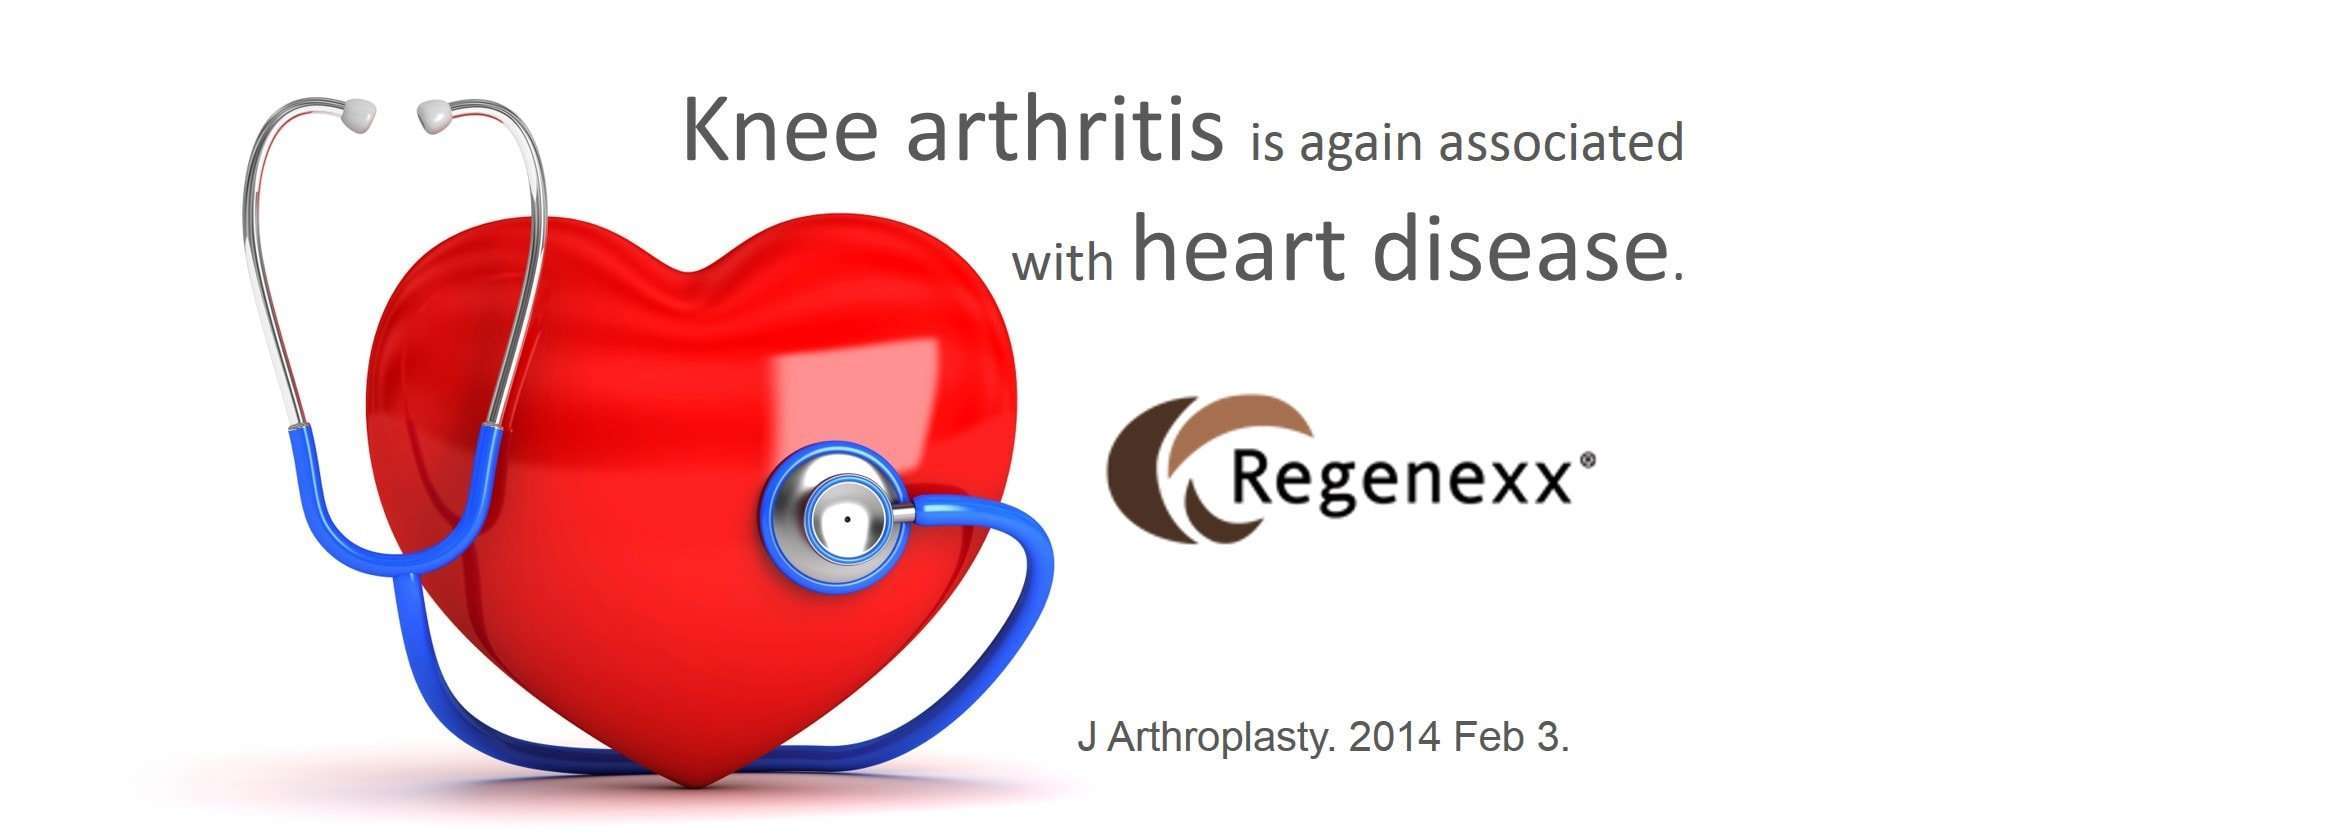 Is There a Knee Arthritis Heart Disease Association ...